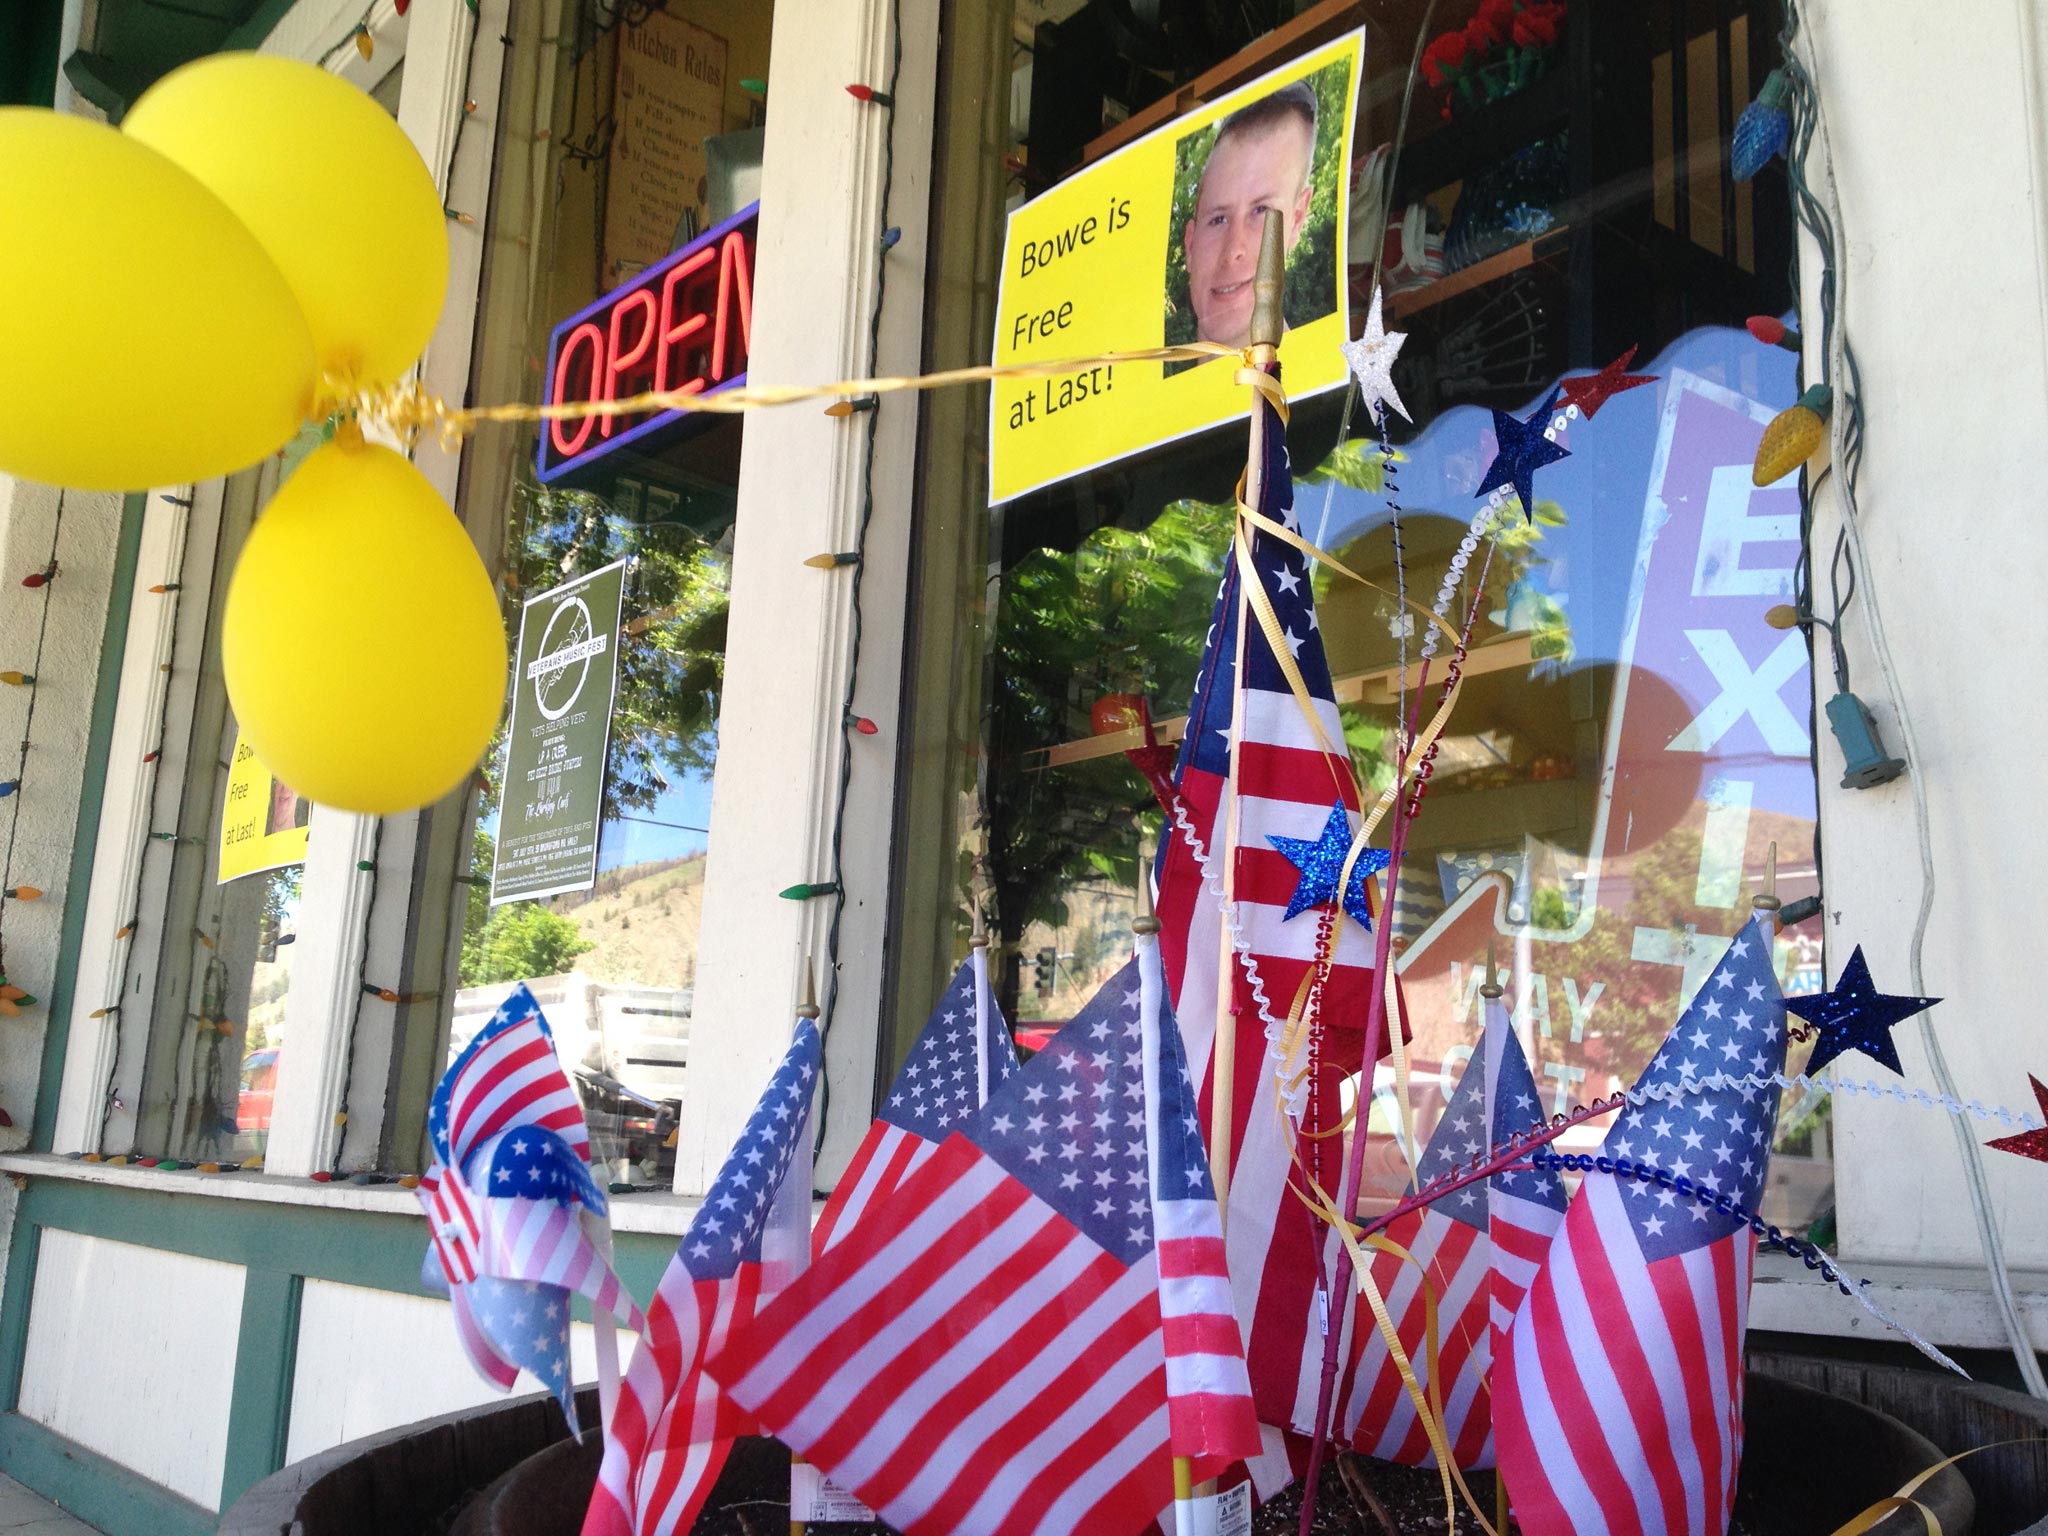 Flags and balloons marking the release from captivity of Sgt. Bowe Bergdahl adorn the sidewalk outside a shop in the soldier's hometown of Hailey, Idaho